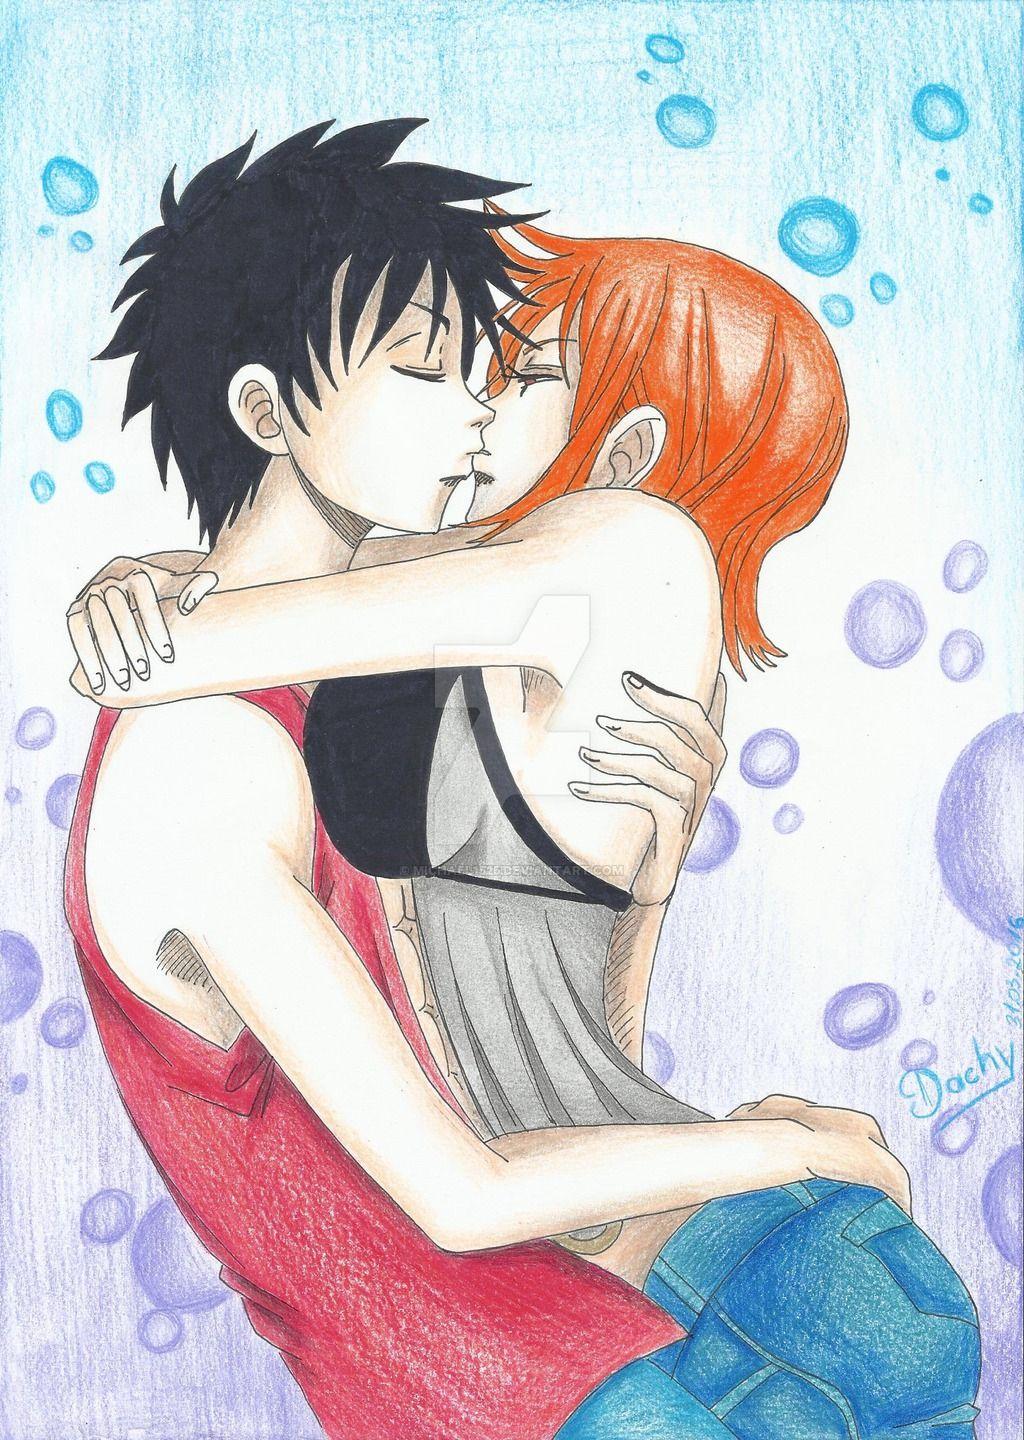 1024 x 1440 · jpeg - One Piece Wallpaper: One Piece Luffy And Nami Relationship